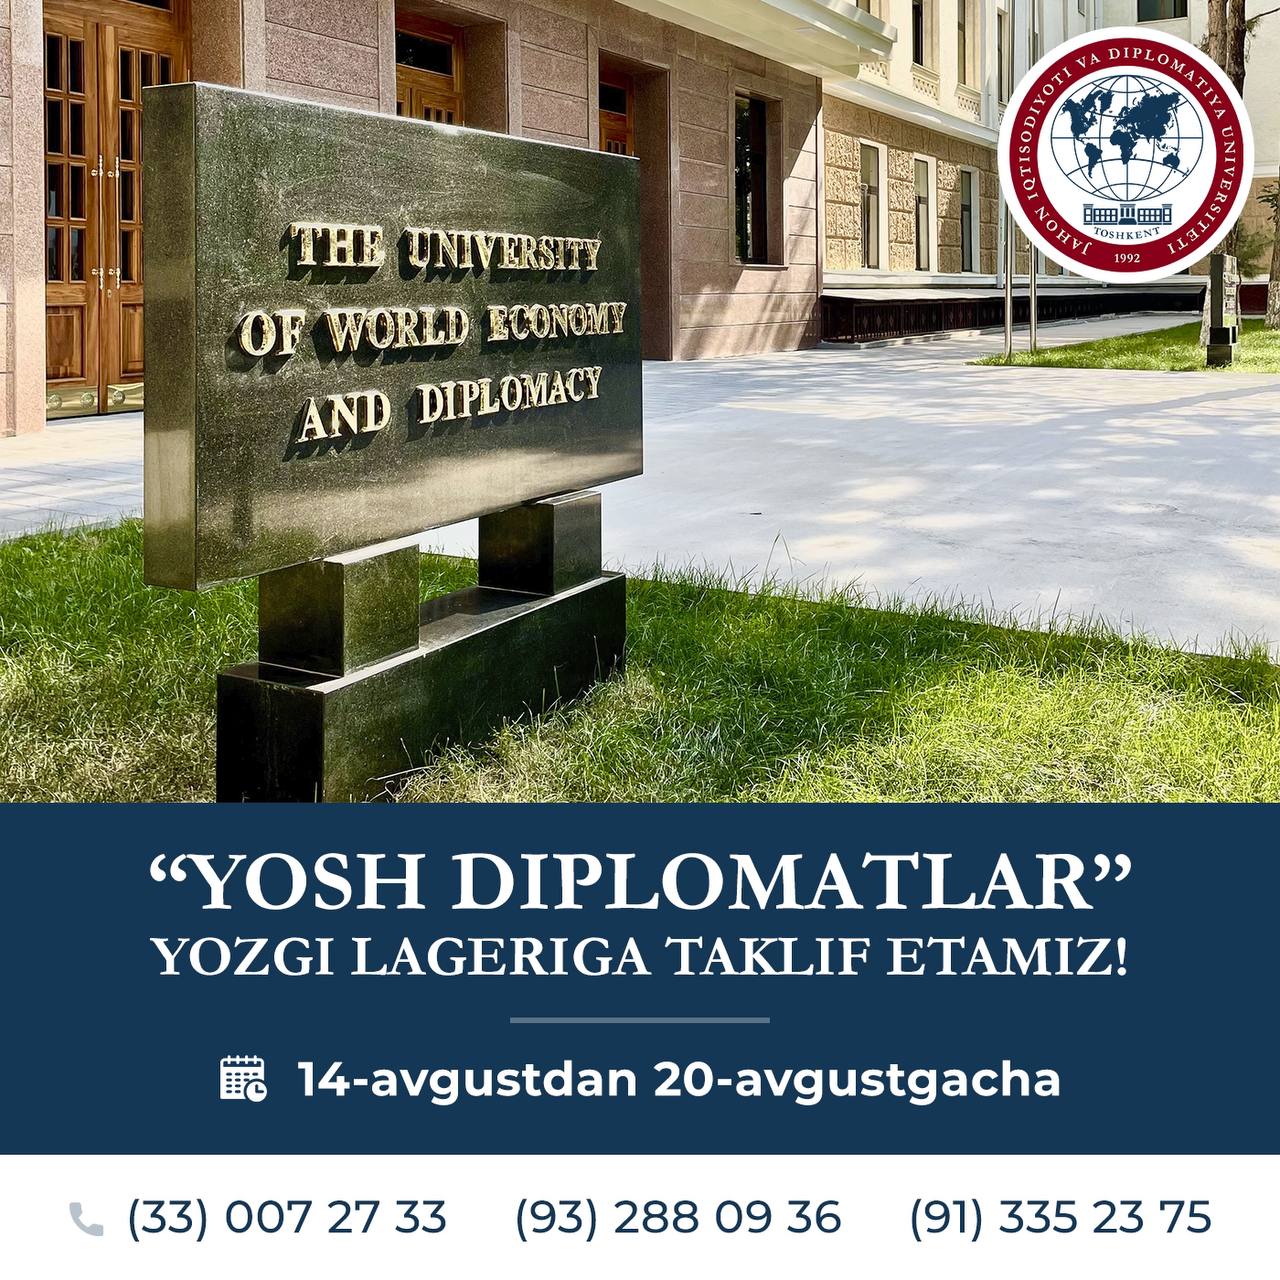 Admission to the summer camp “YOUNG DIPLOMATS” for school students has begun at the University of World Economy and Diplomacy